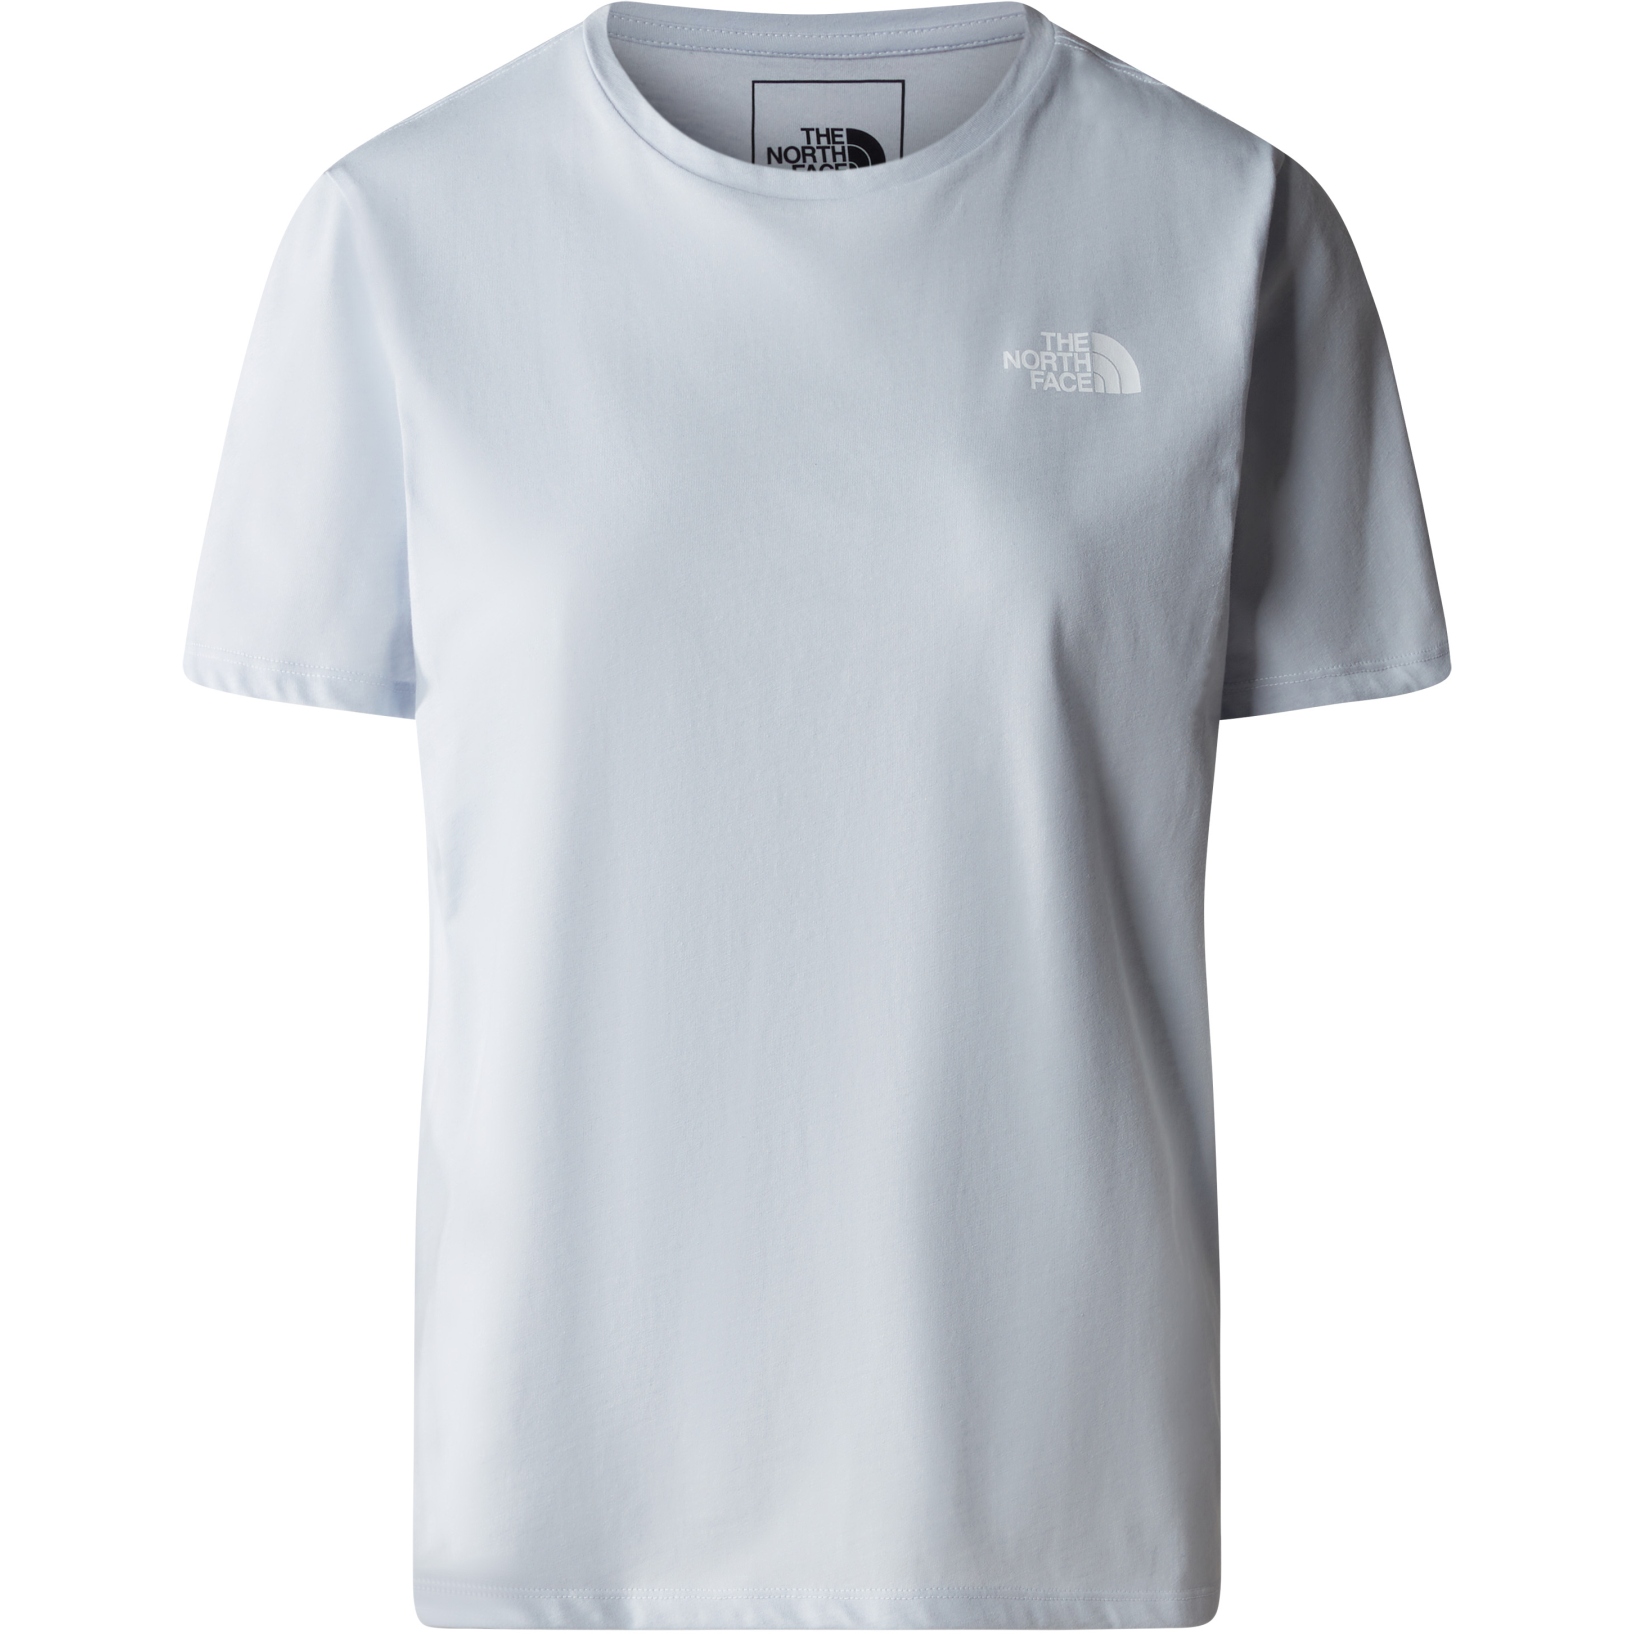 Picture of The North Face Foundation Graphic Tee Women - Dusty Periwinkle